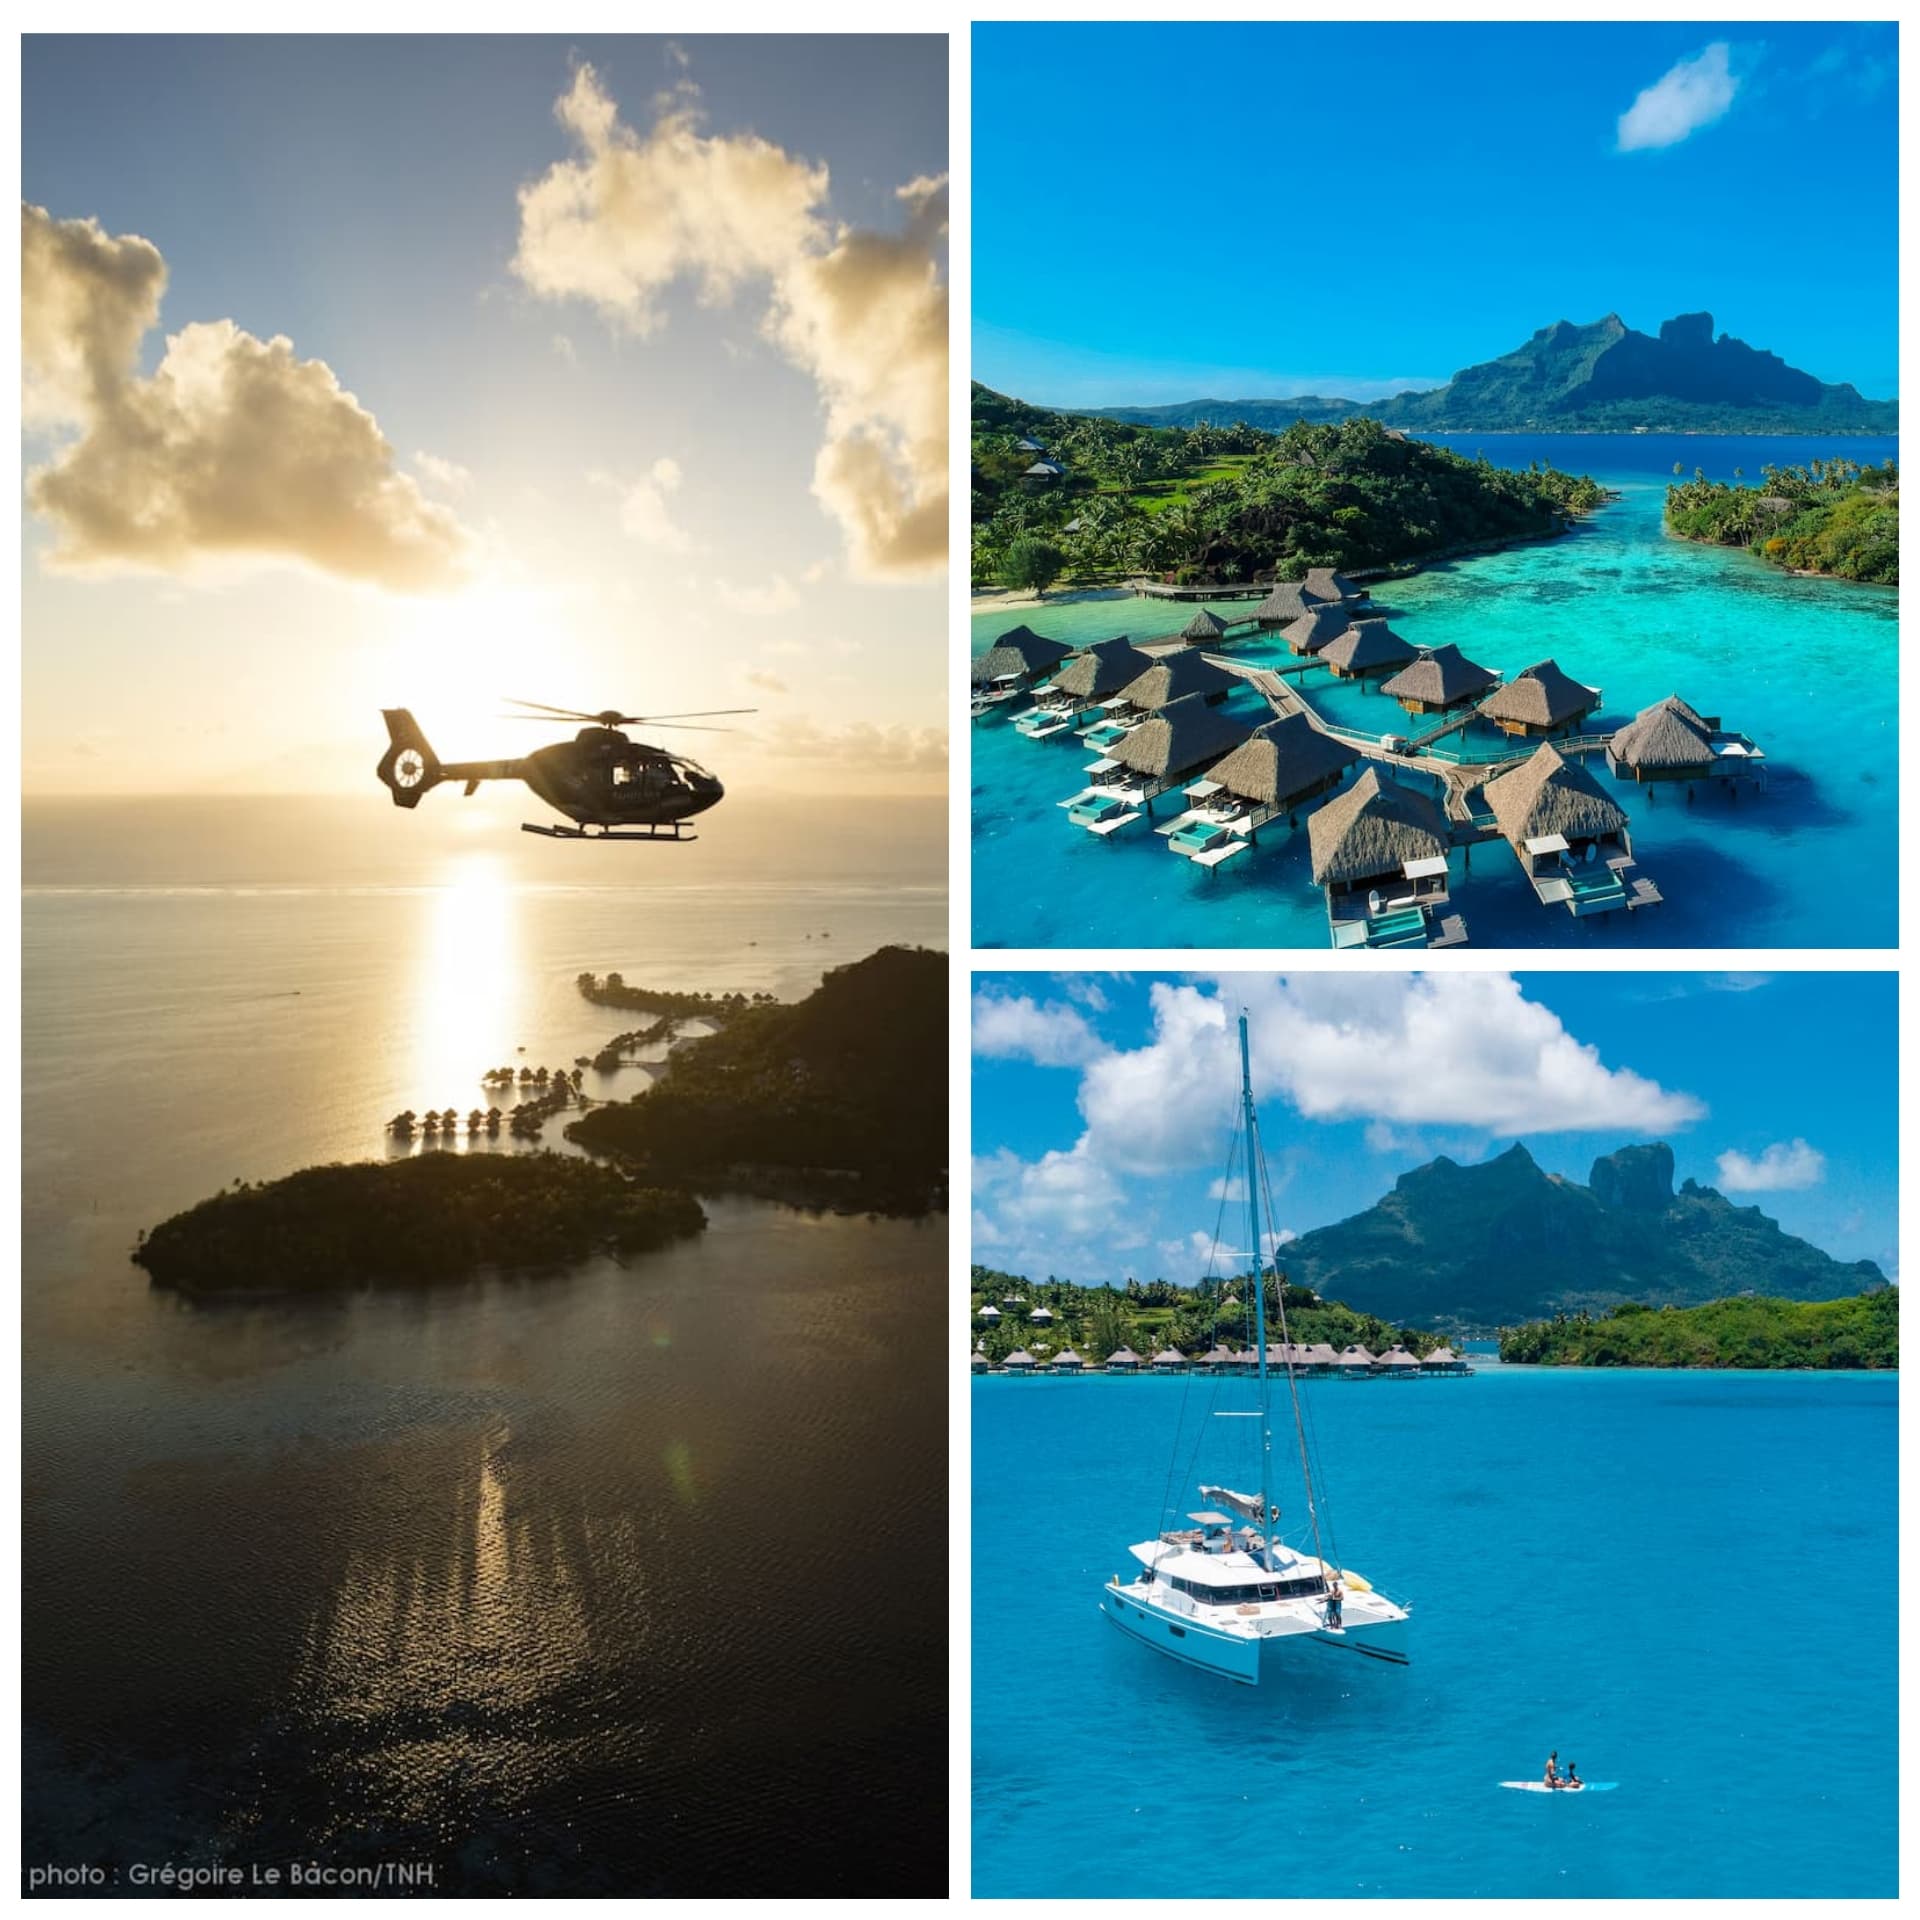 Collage of Conrad Bora Bora Nui Resort with helicopter flying over the resort at sunset, aerial view of the resort with Mt. Otemanu, and catamaran with a couple on paddle boards in front.